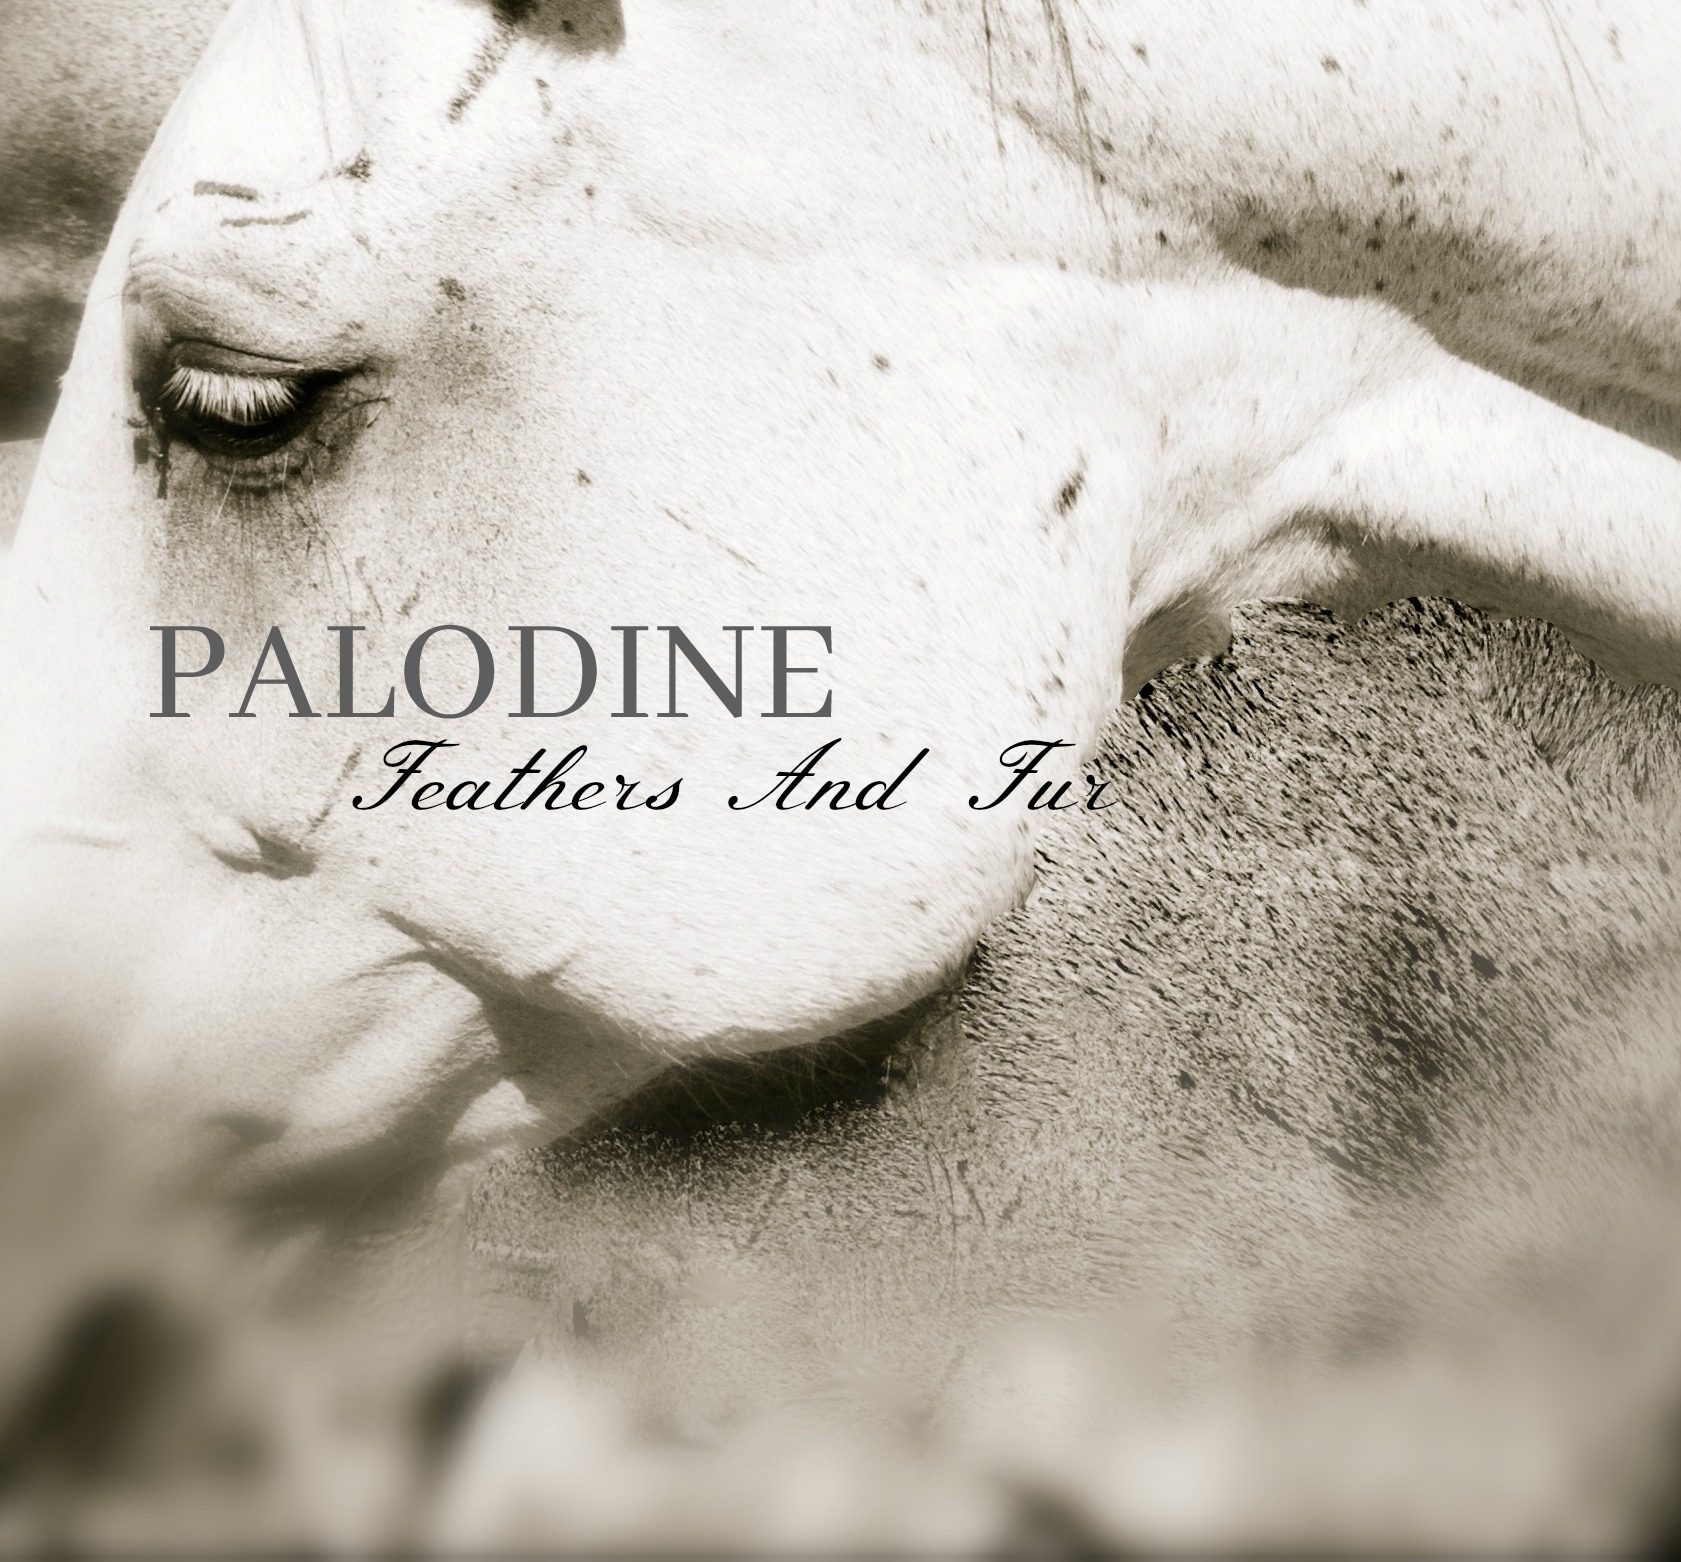 Palodine discography (2006-2022)